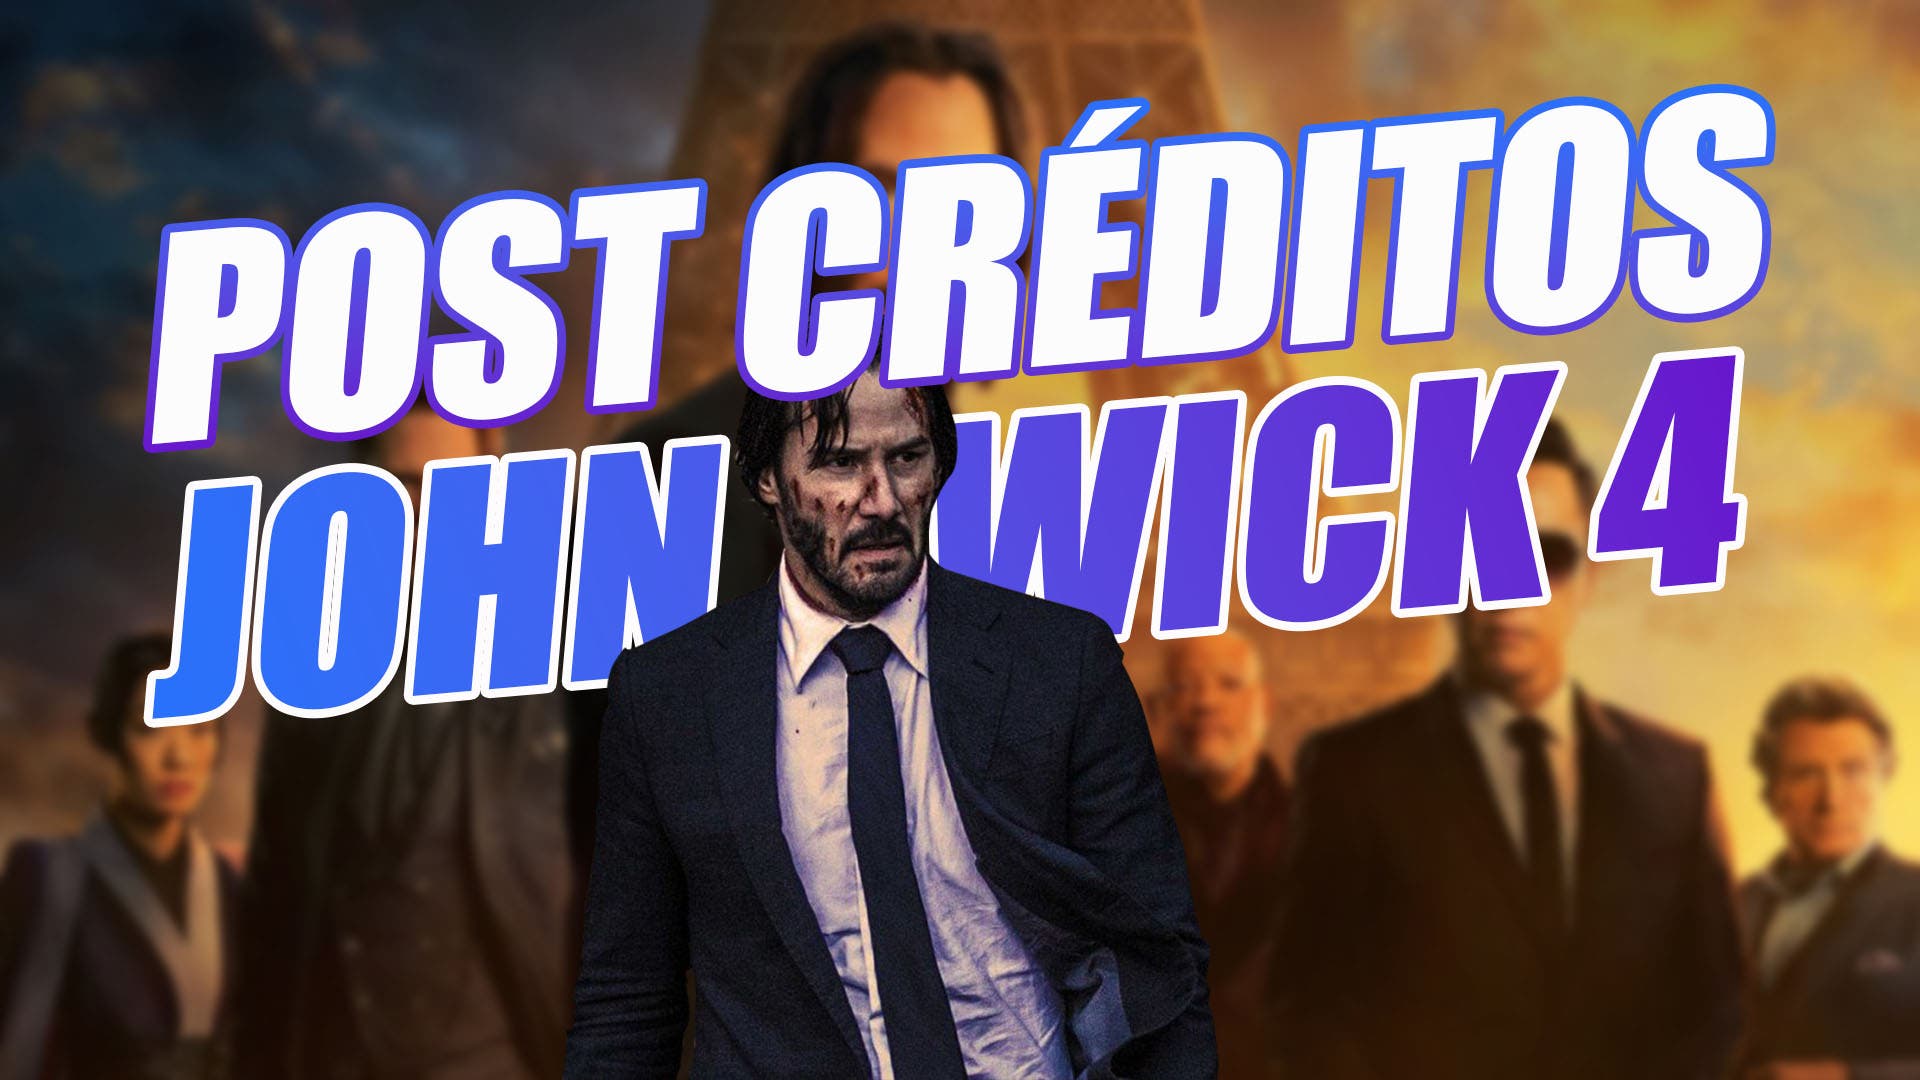 How many post-credits scenes does John Wick 4 have?